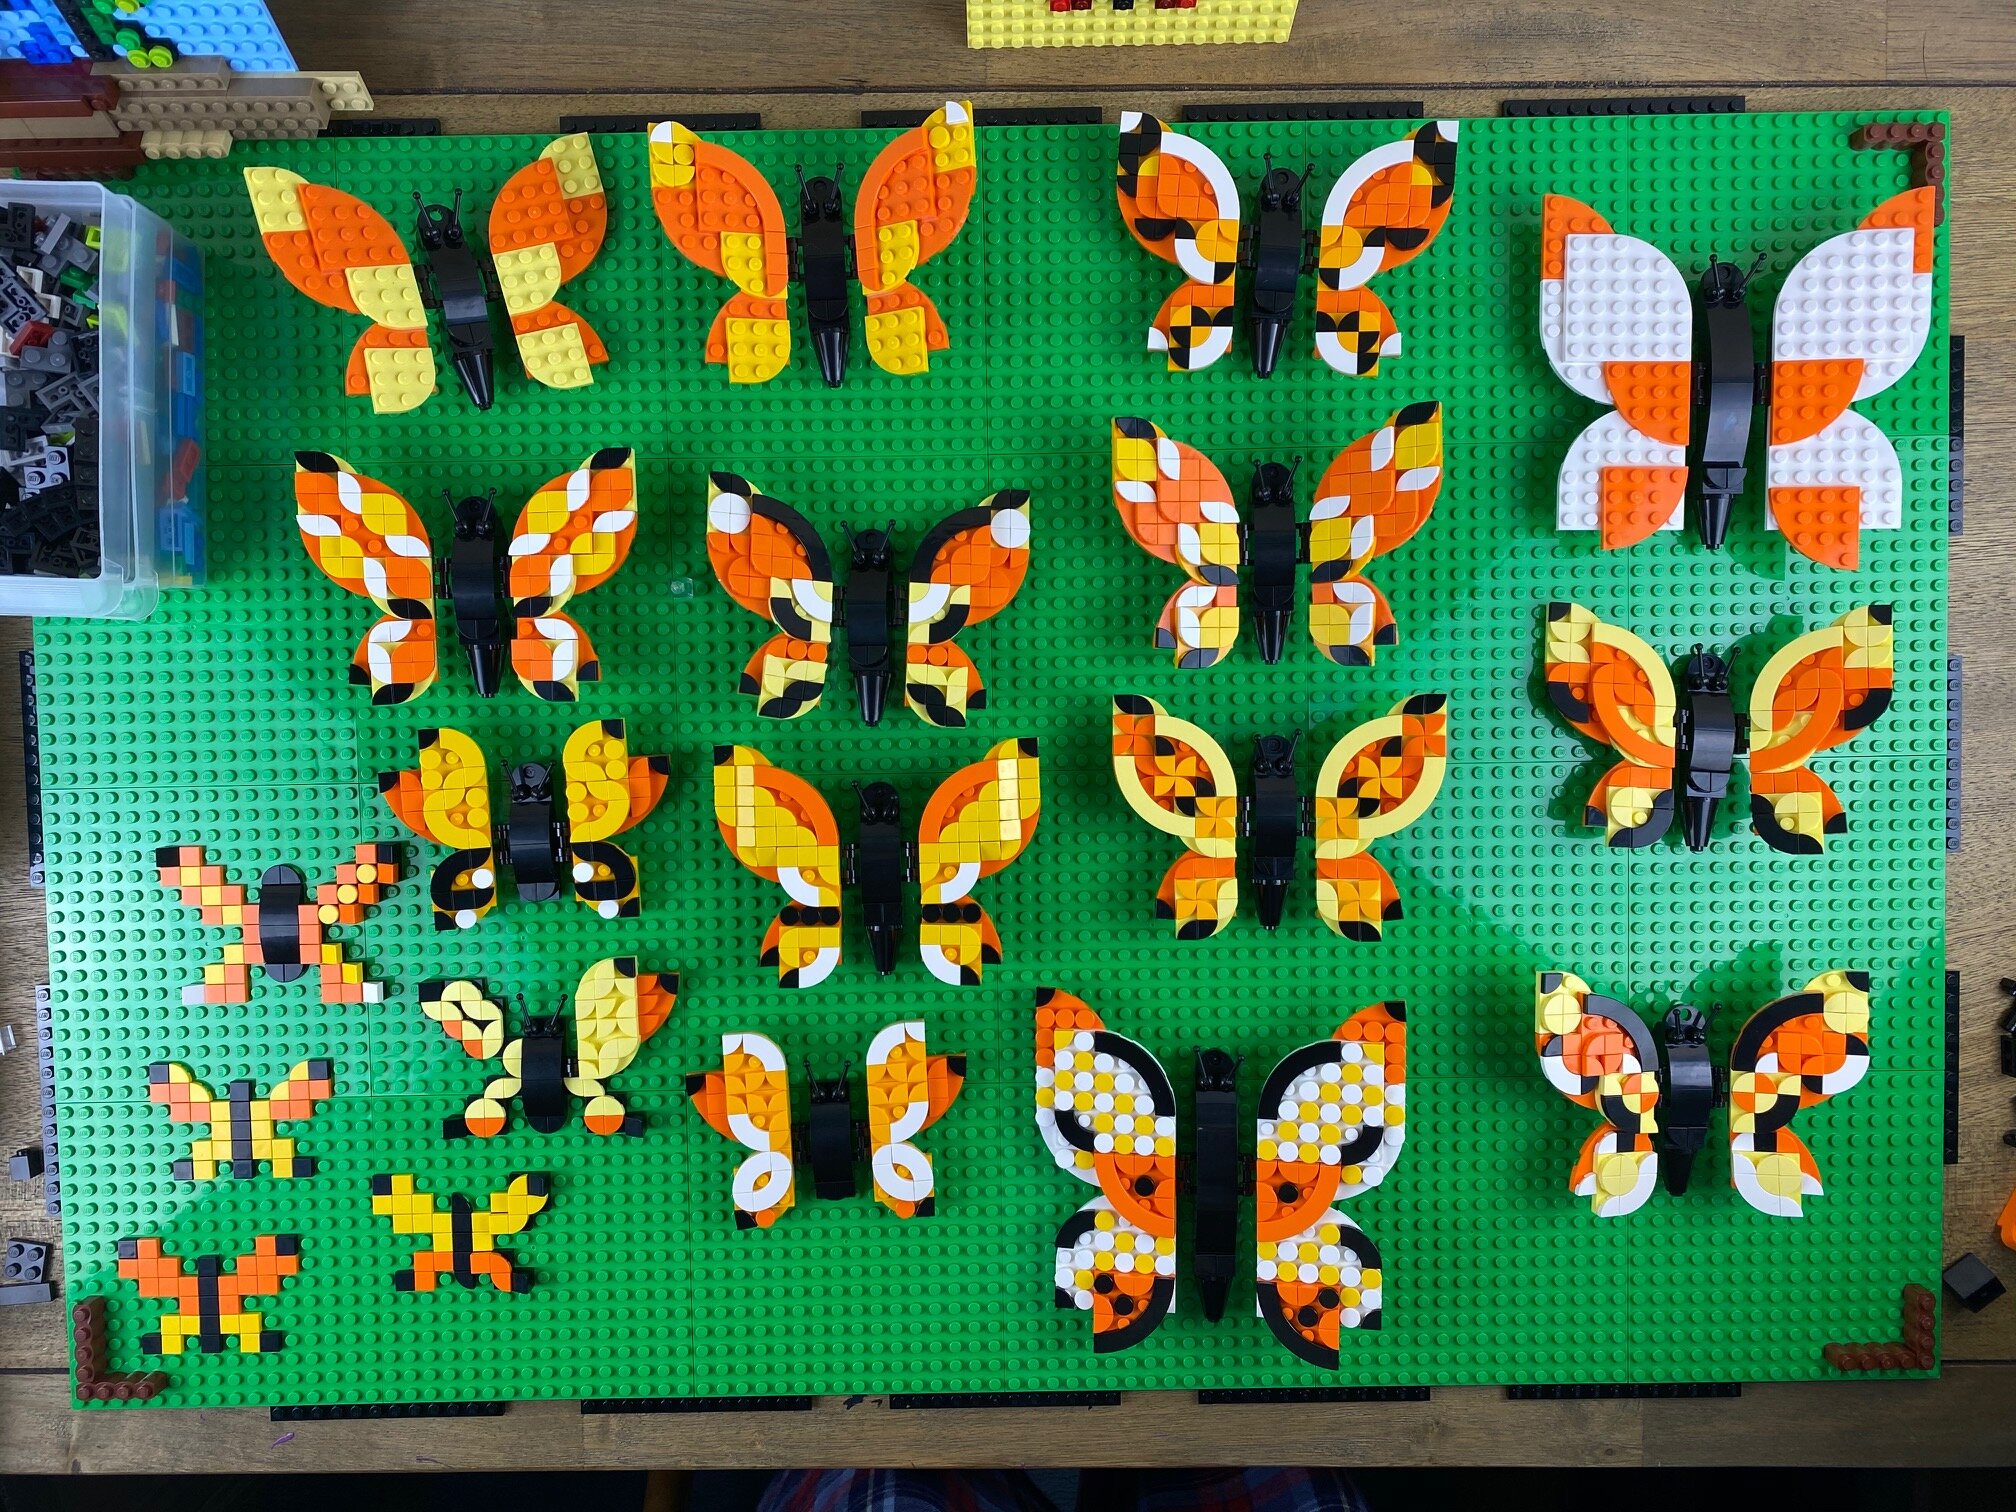 kort flertal quagga Welcoming Spring with a Burst of Beautiful Butterflies - BrickNerd - All  things LEGO and the LEGO fan community